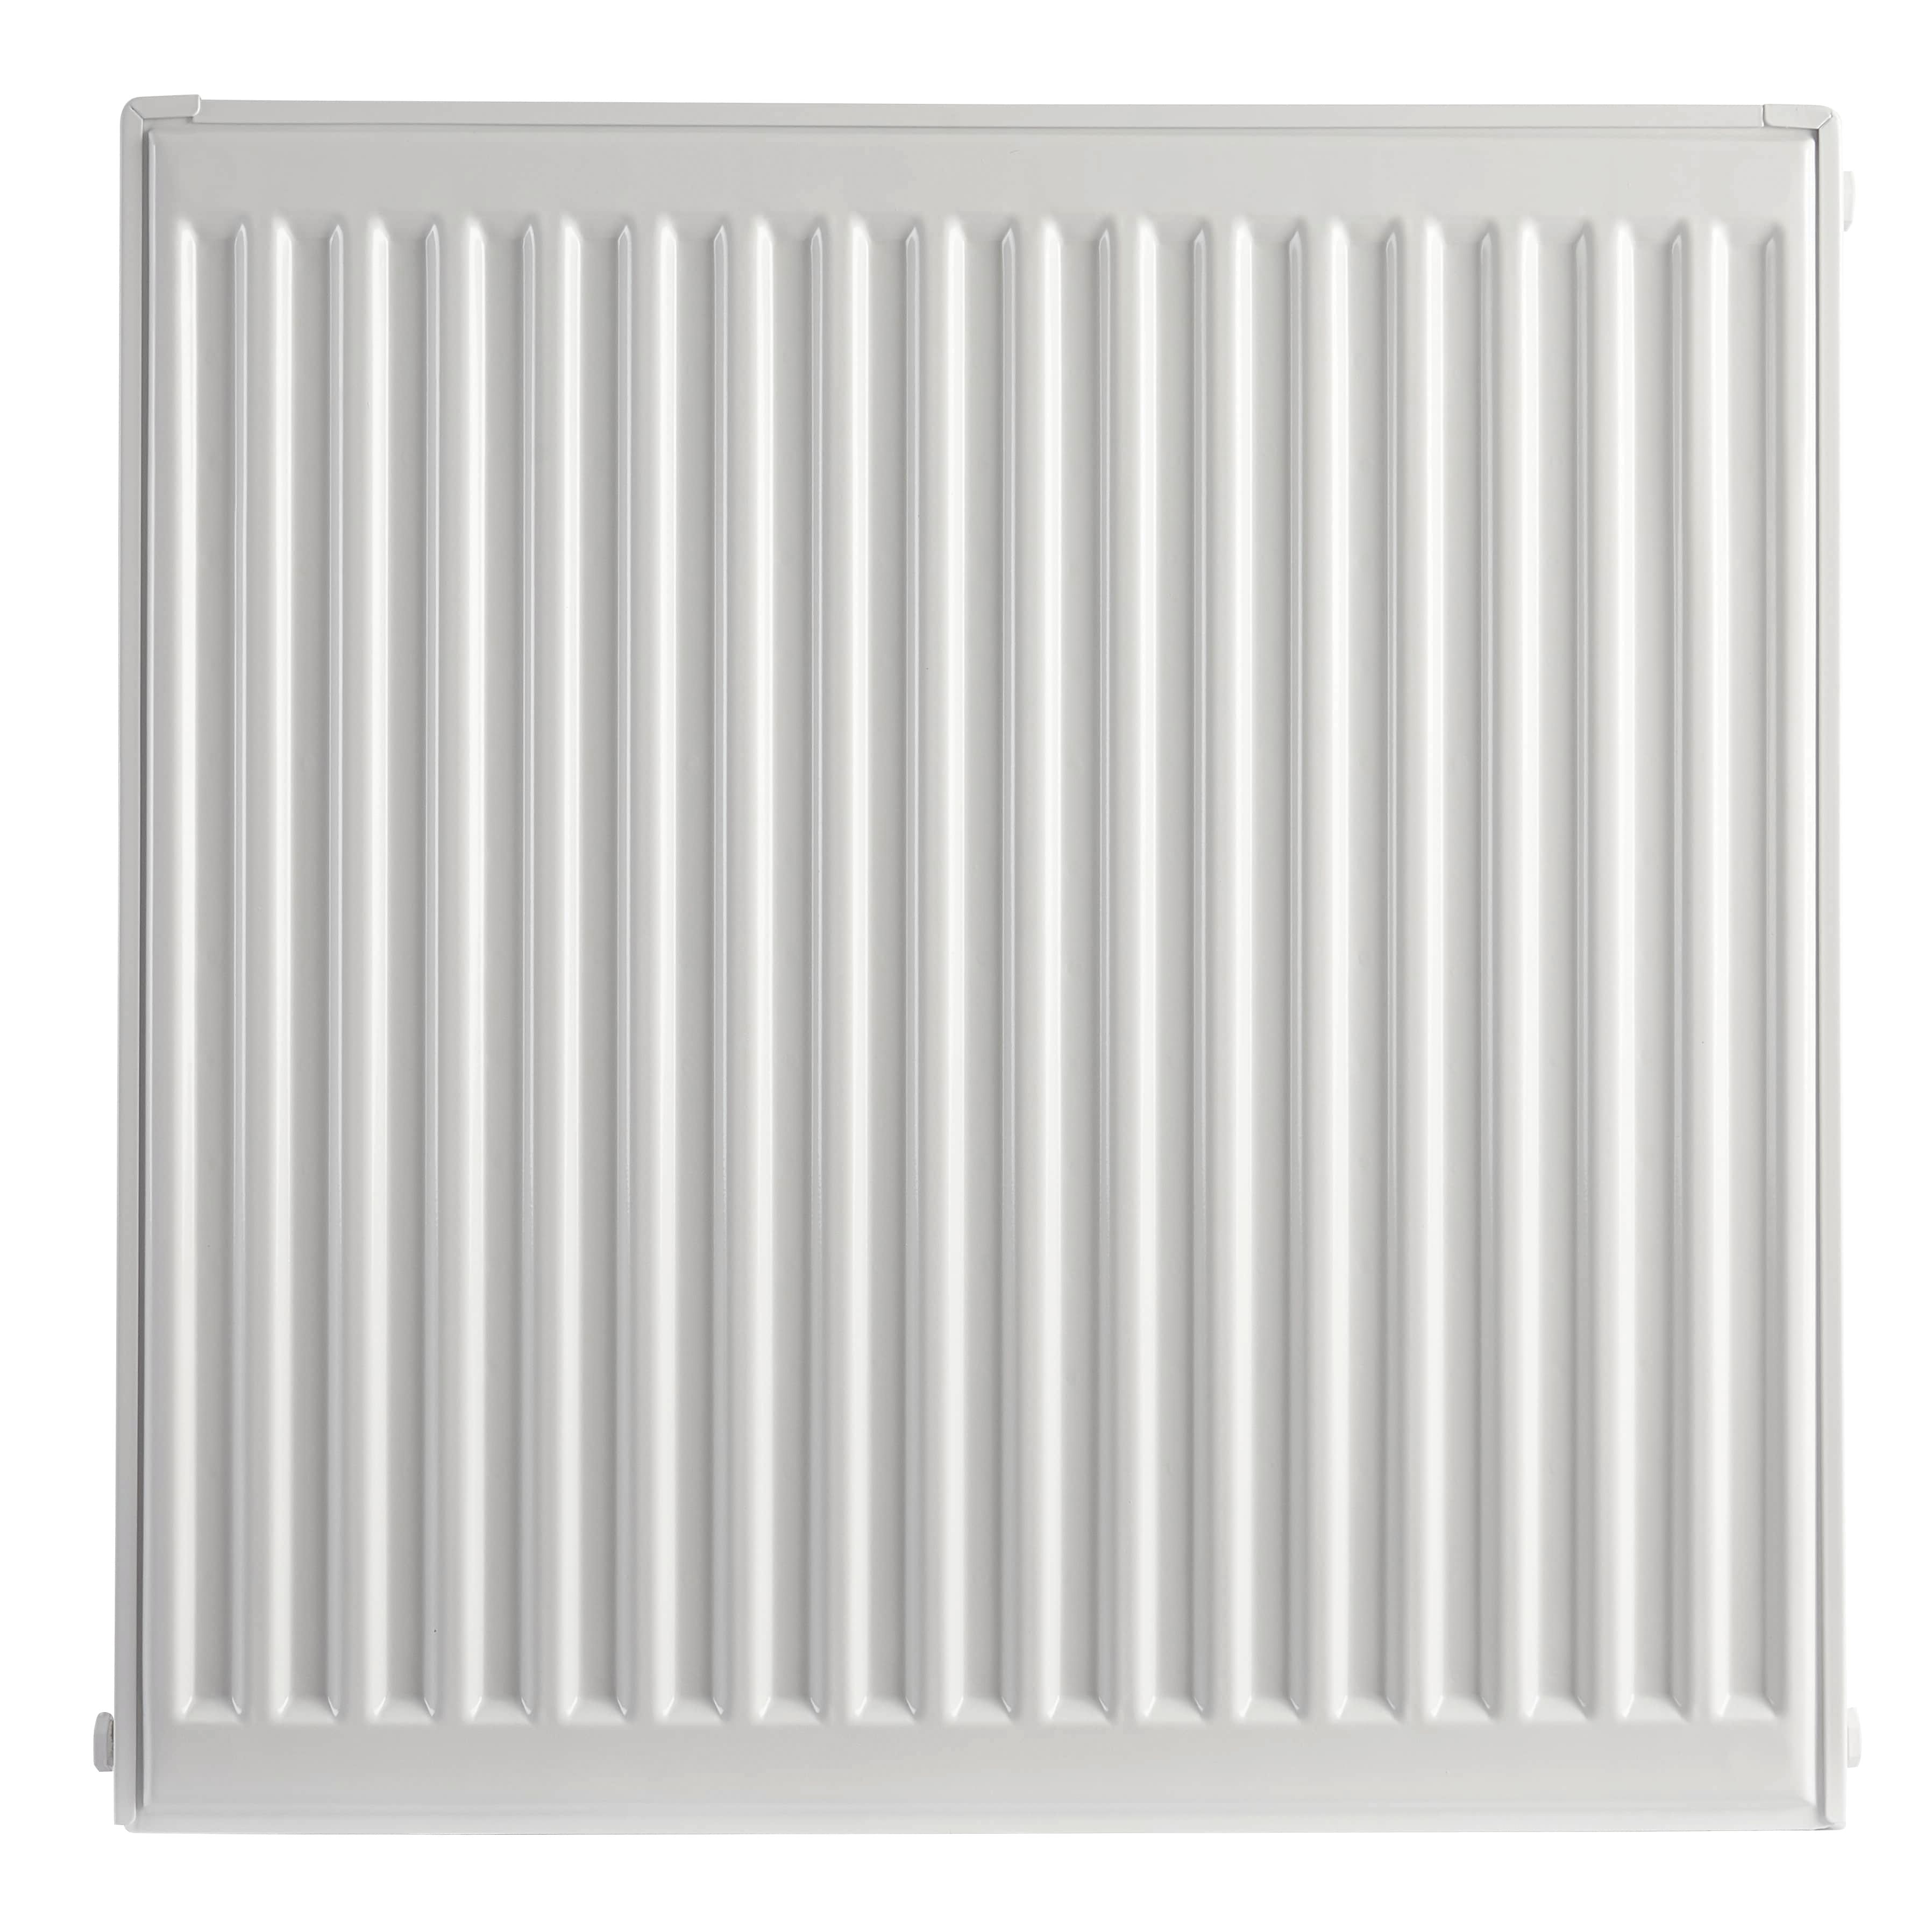 Image of Homeline by Stelrad 500 x 500mm Type 11 Single Panel Single Convector Radiator